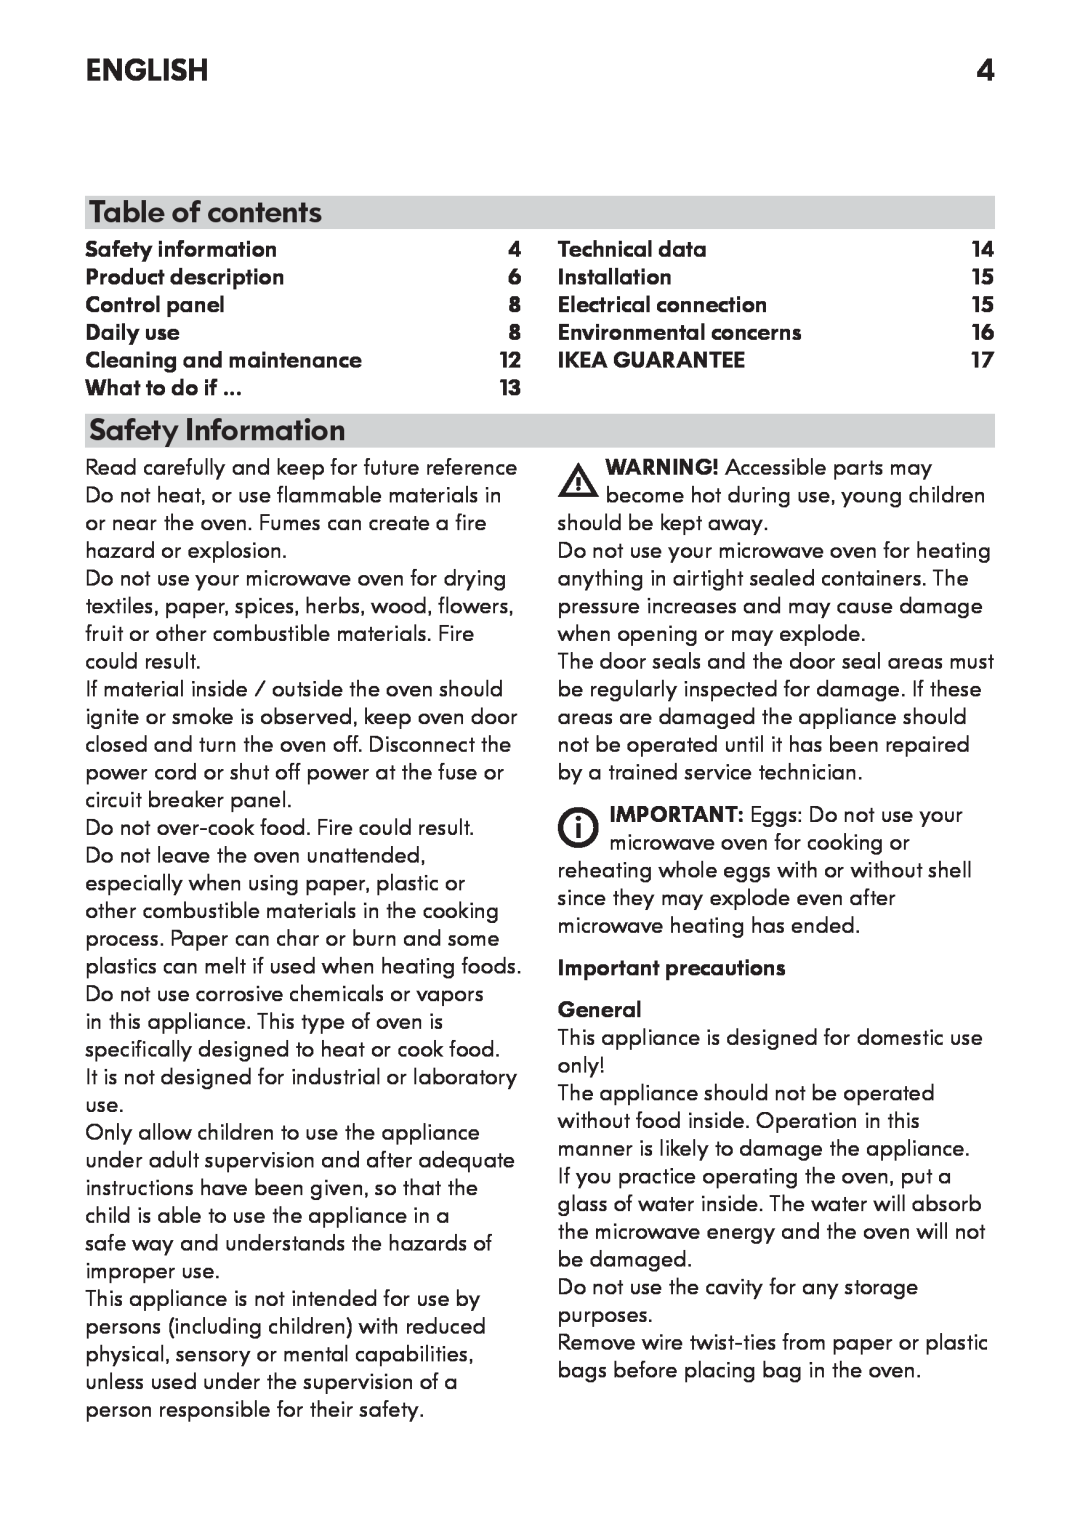 Whirlpool MW 3 manual ENGLISH Table of contents, Safety Information 